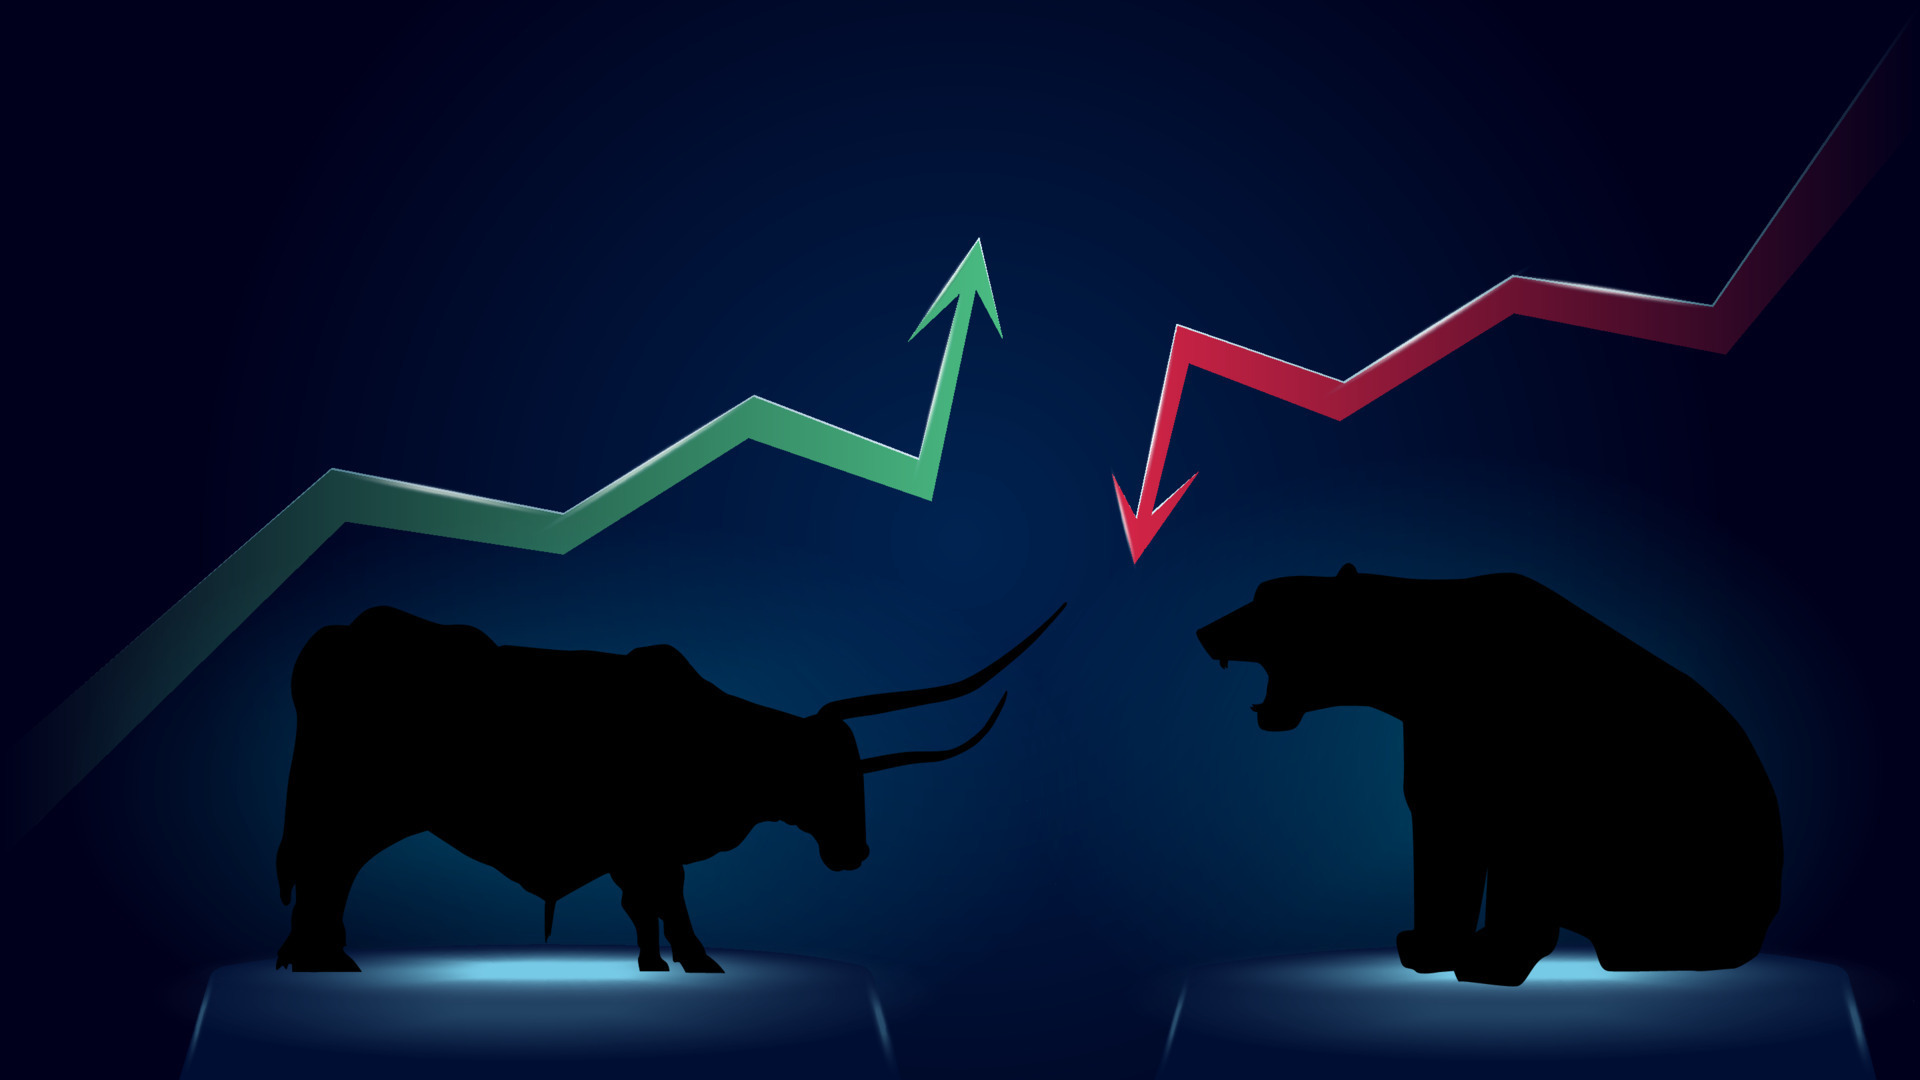 Bullish trend versus bearish trend with green up and red down arrows on dark blue background. Bull and bear on pedestals opposite each other. Vector illustration